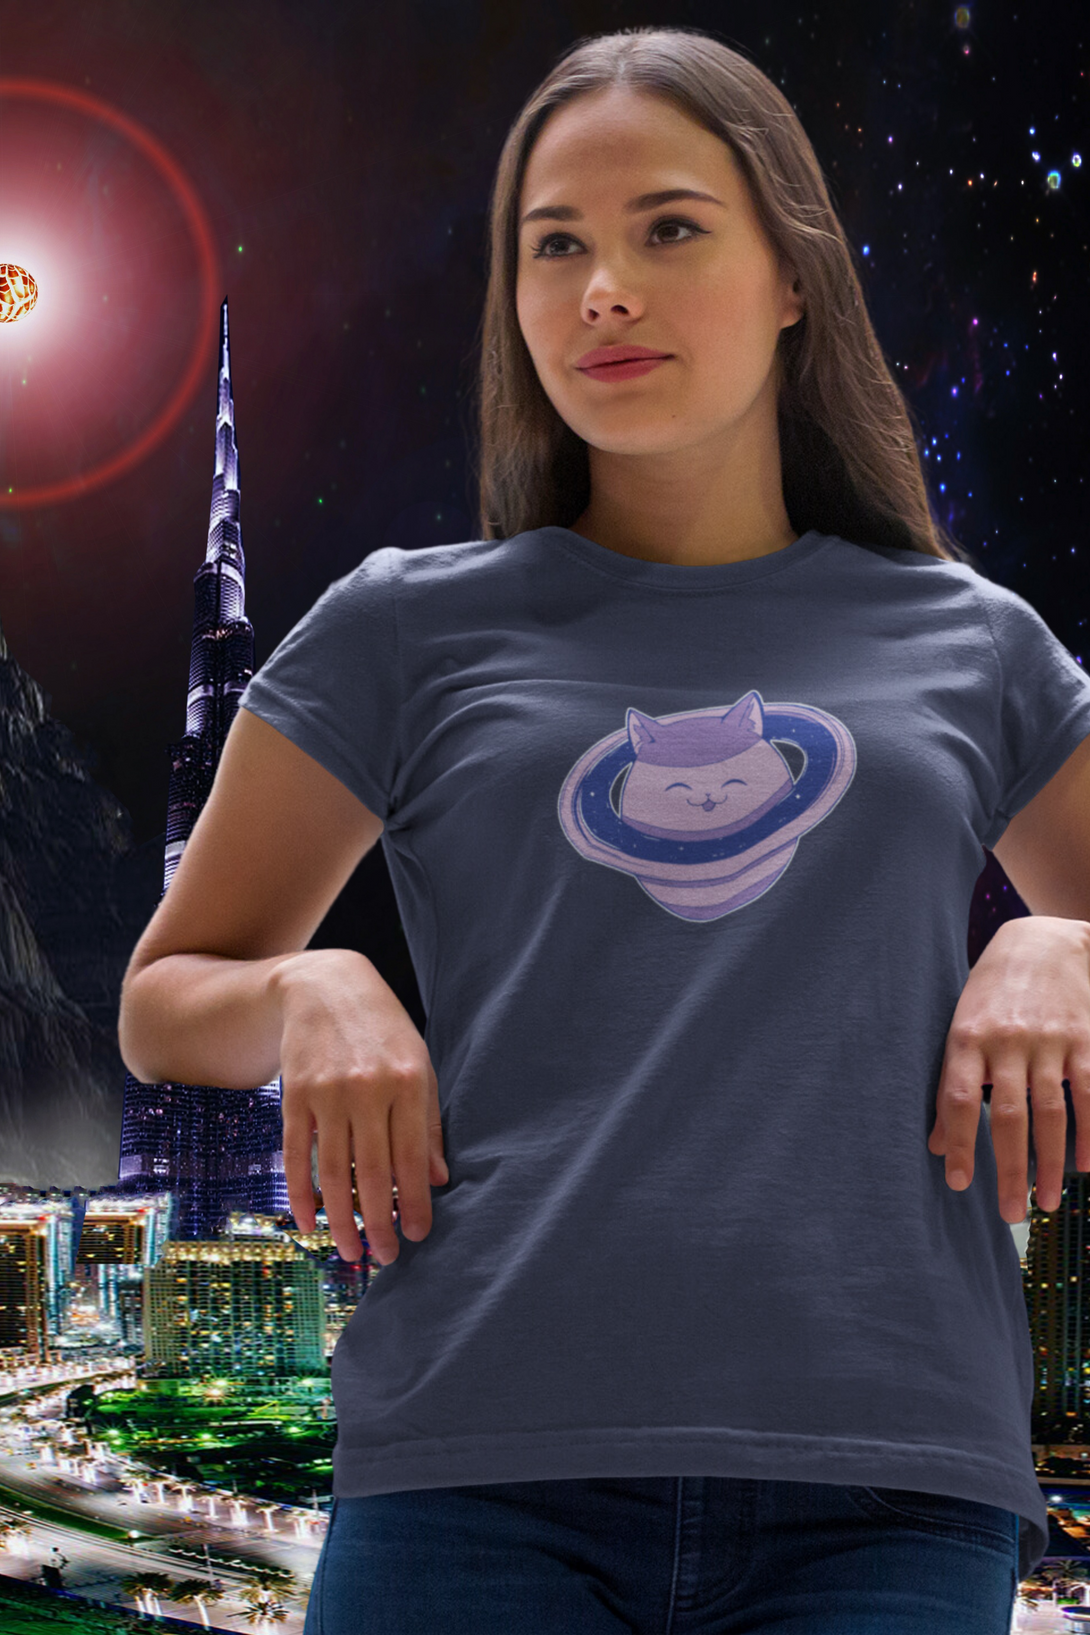 Cosmic Cat Planet Printed T-Shirt For Women - WowWaves - 4